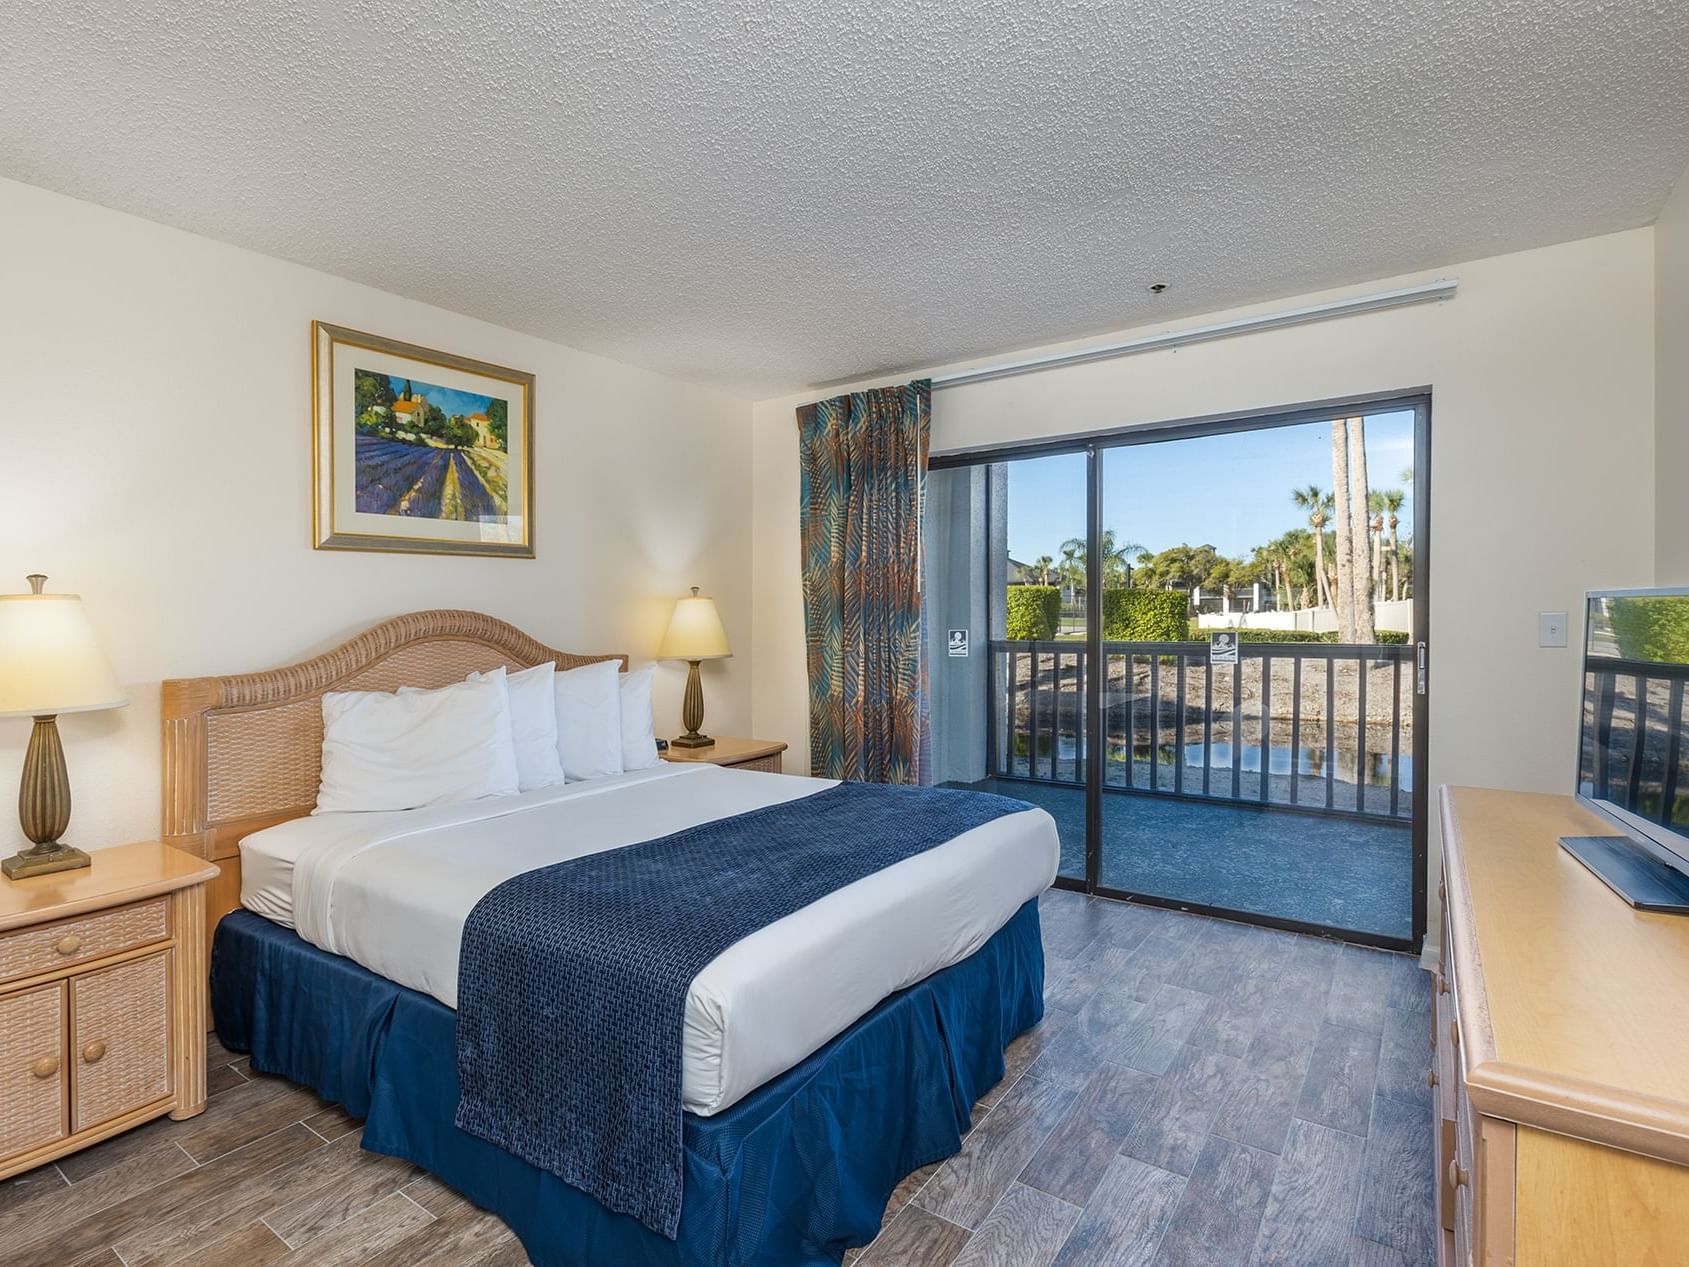 Two bedroom premium suite at Legacy Vacation Resorts